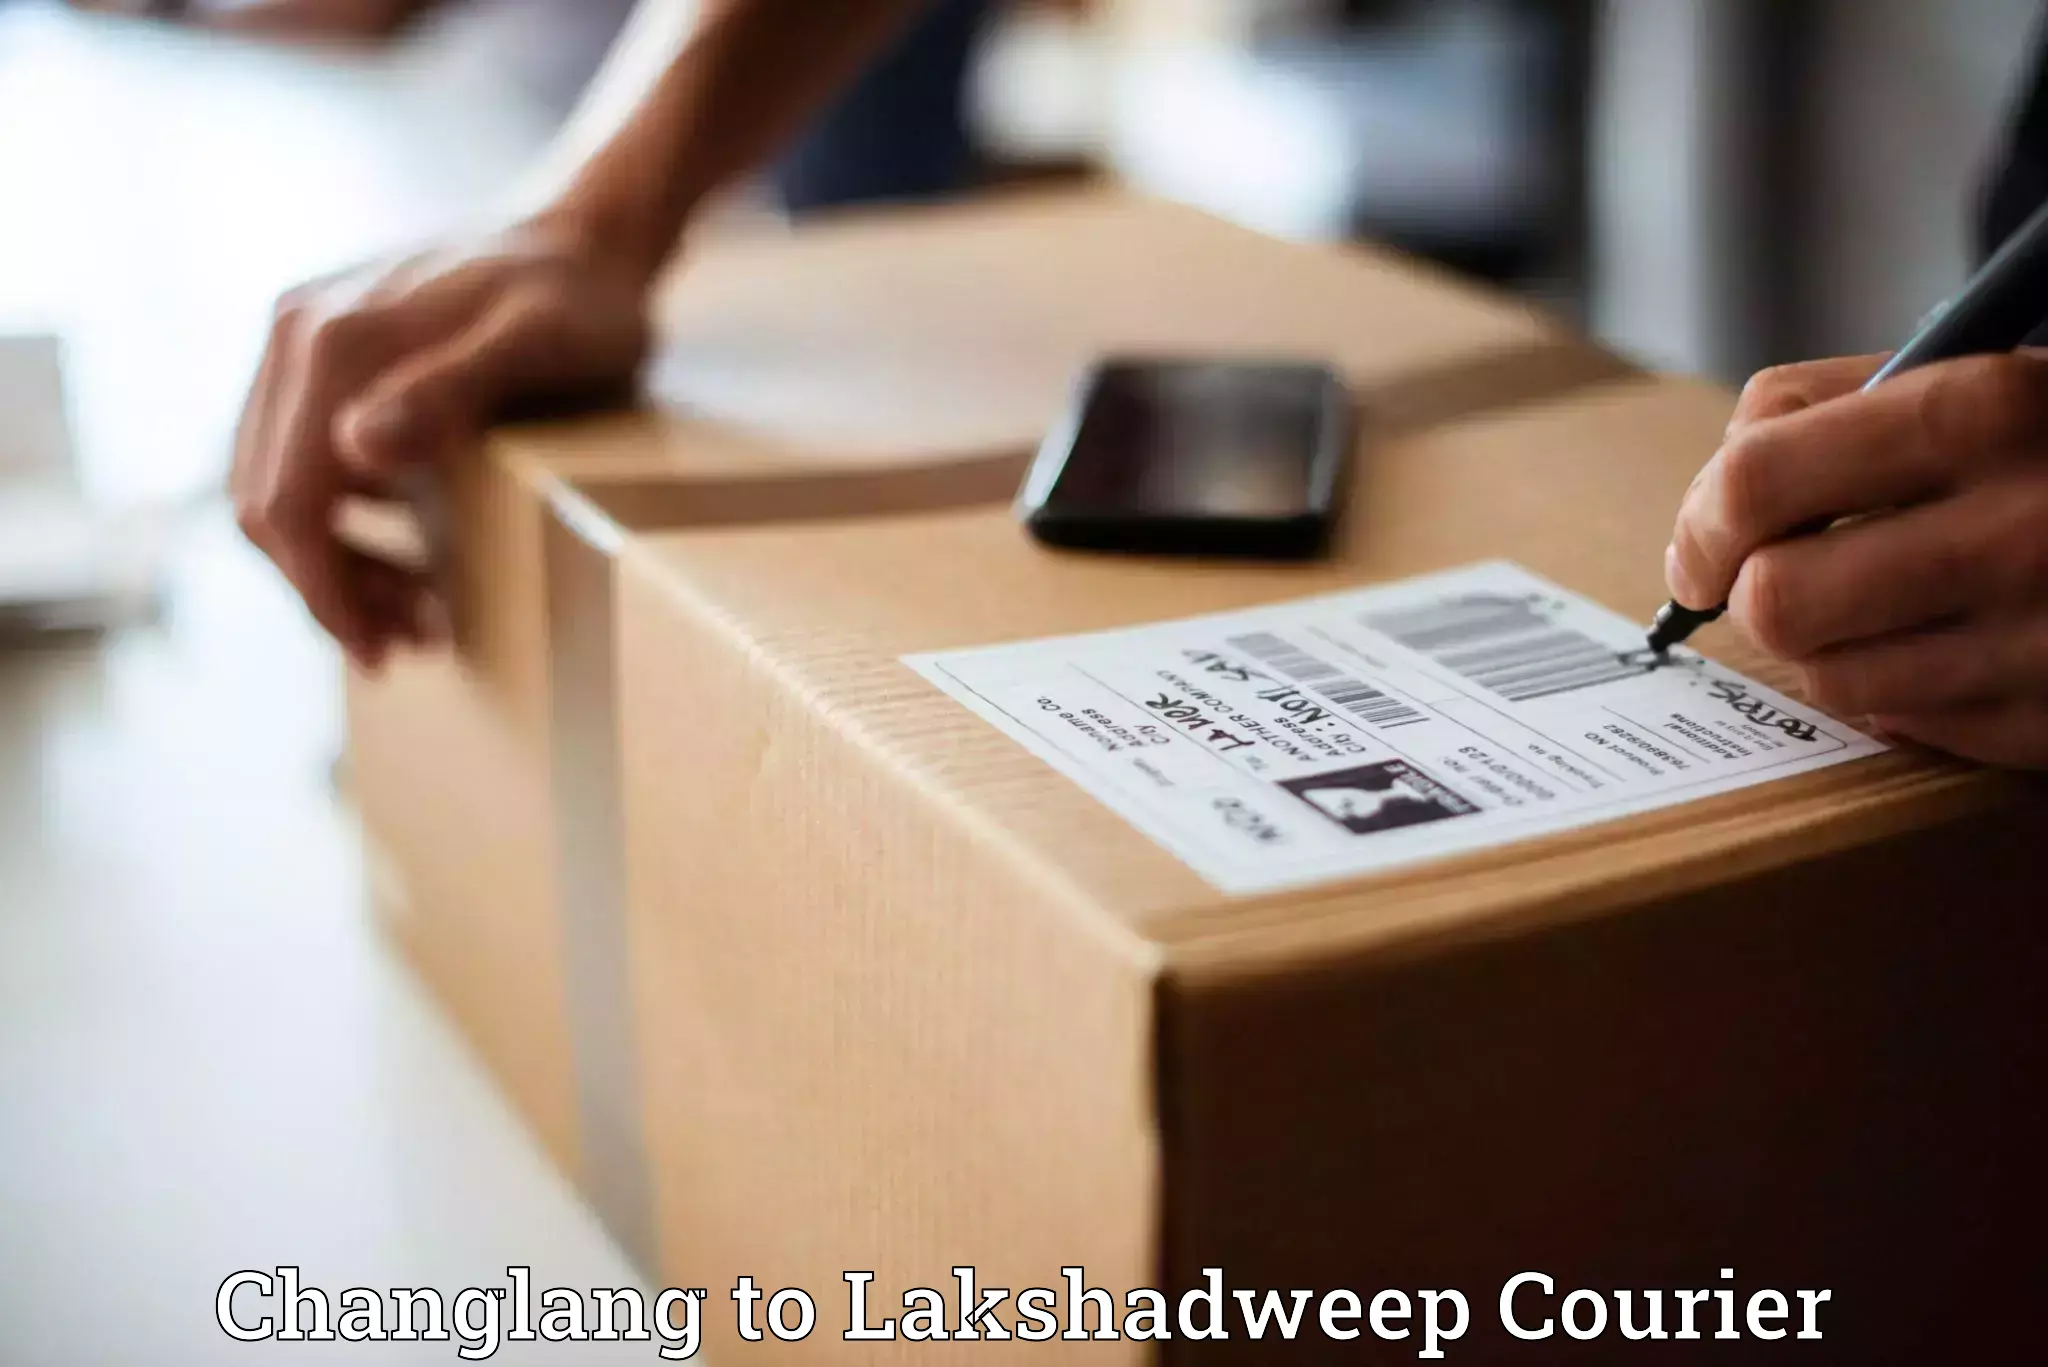 Efficient logistics management in Changlang to Lakshadweep